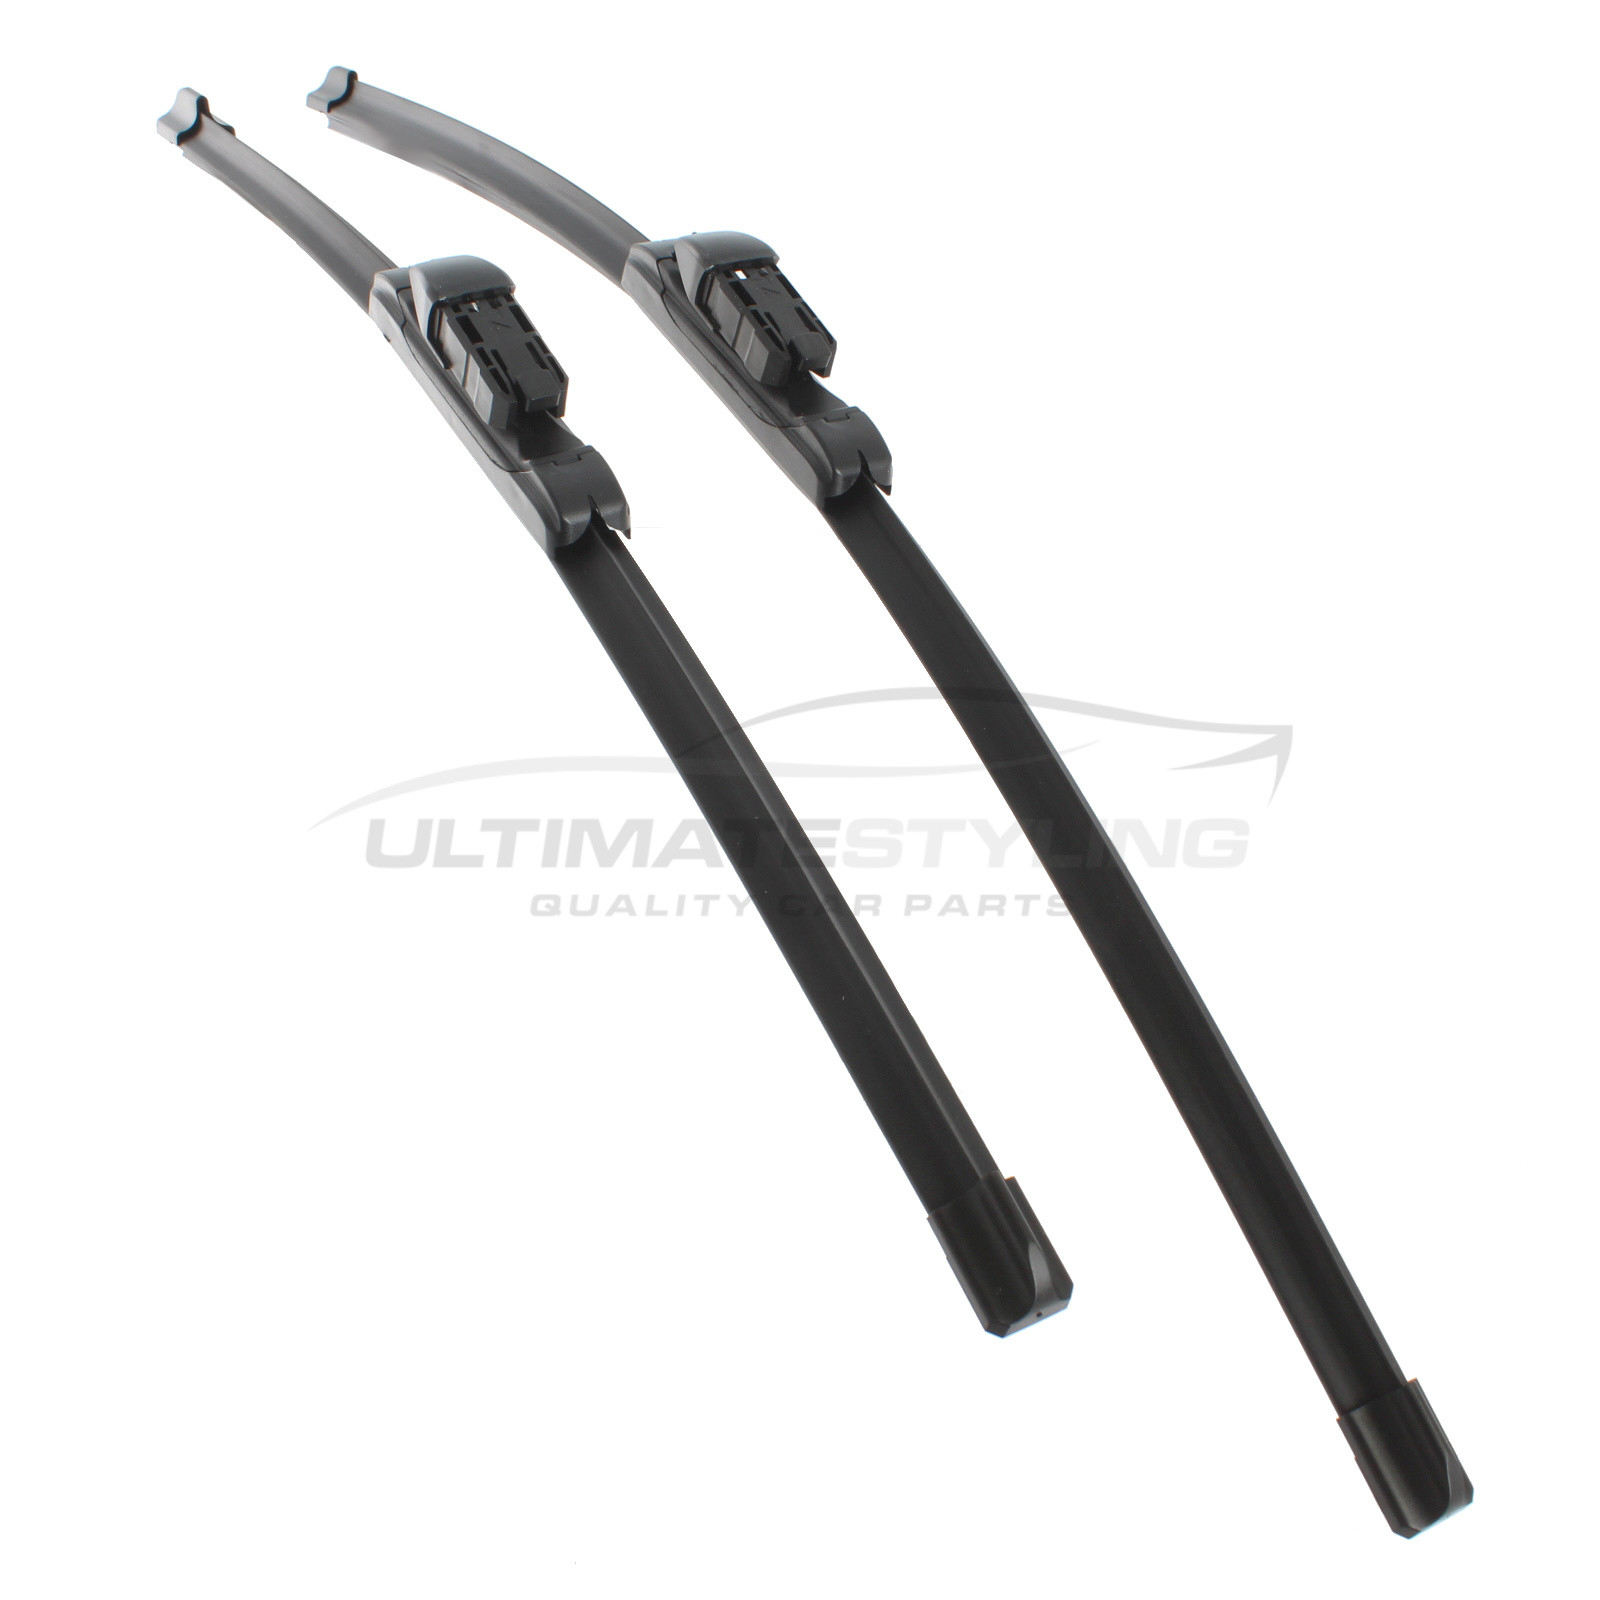 Drivers Side & Passenger Side (Front) Wiper Blades for VW Touran